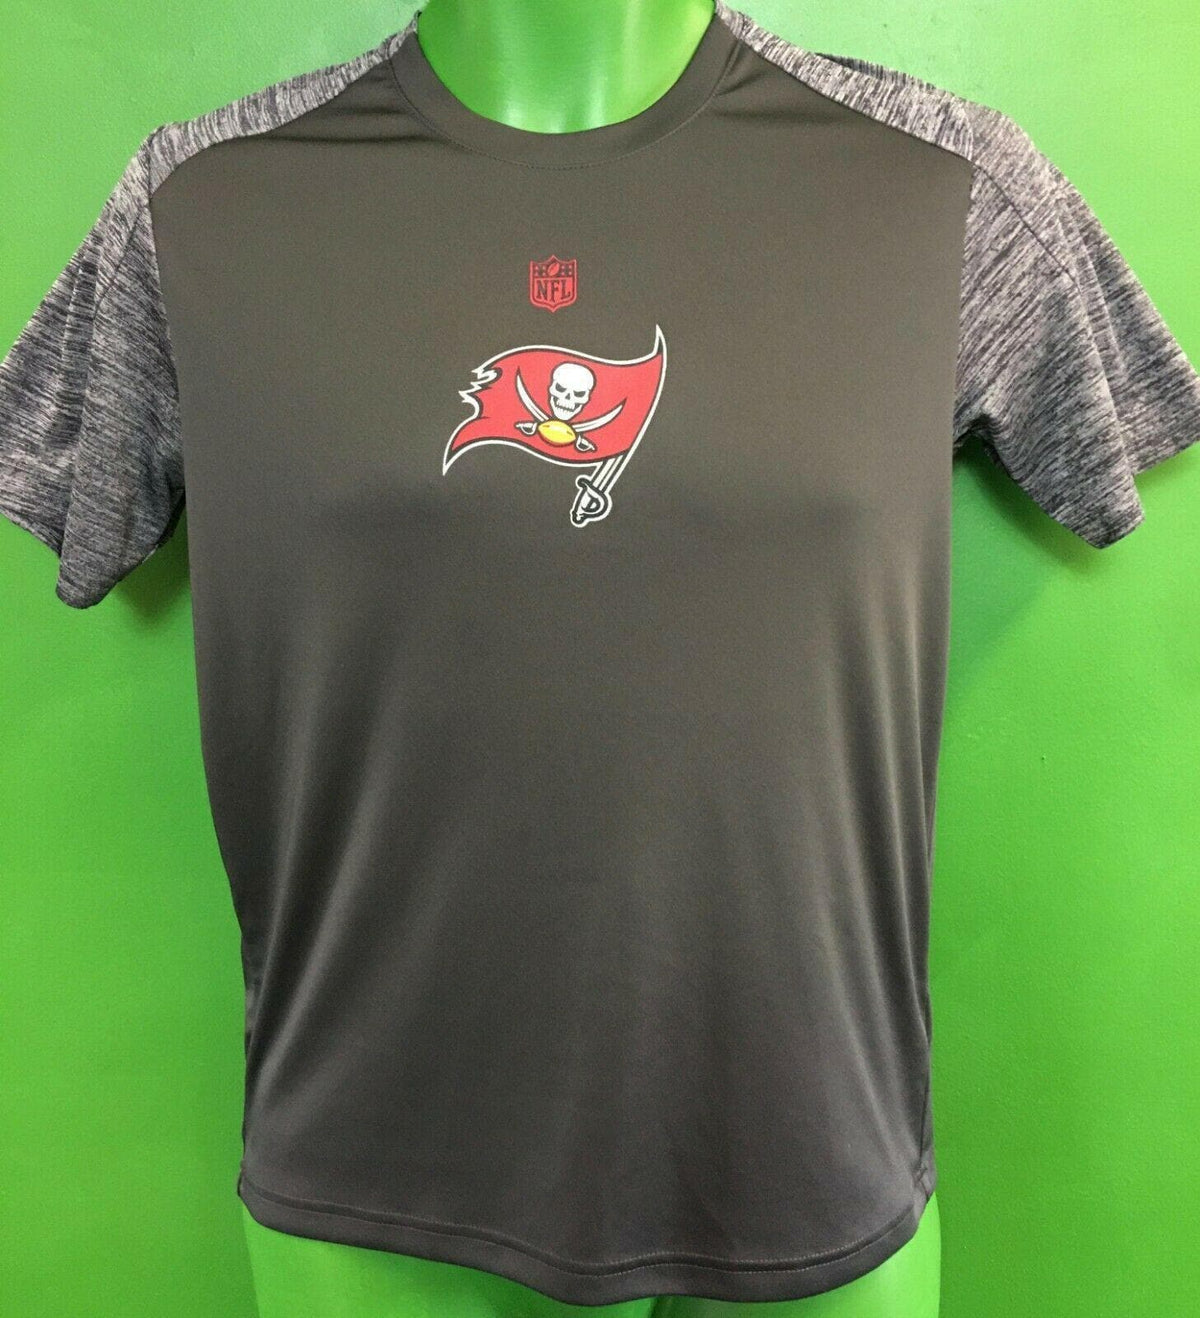 NFL Tampa Bay Buccaneers Wicking T-Shirt Youth Large 14-16